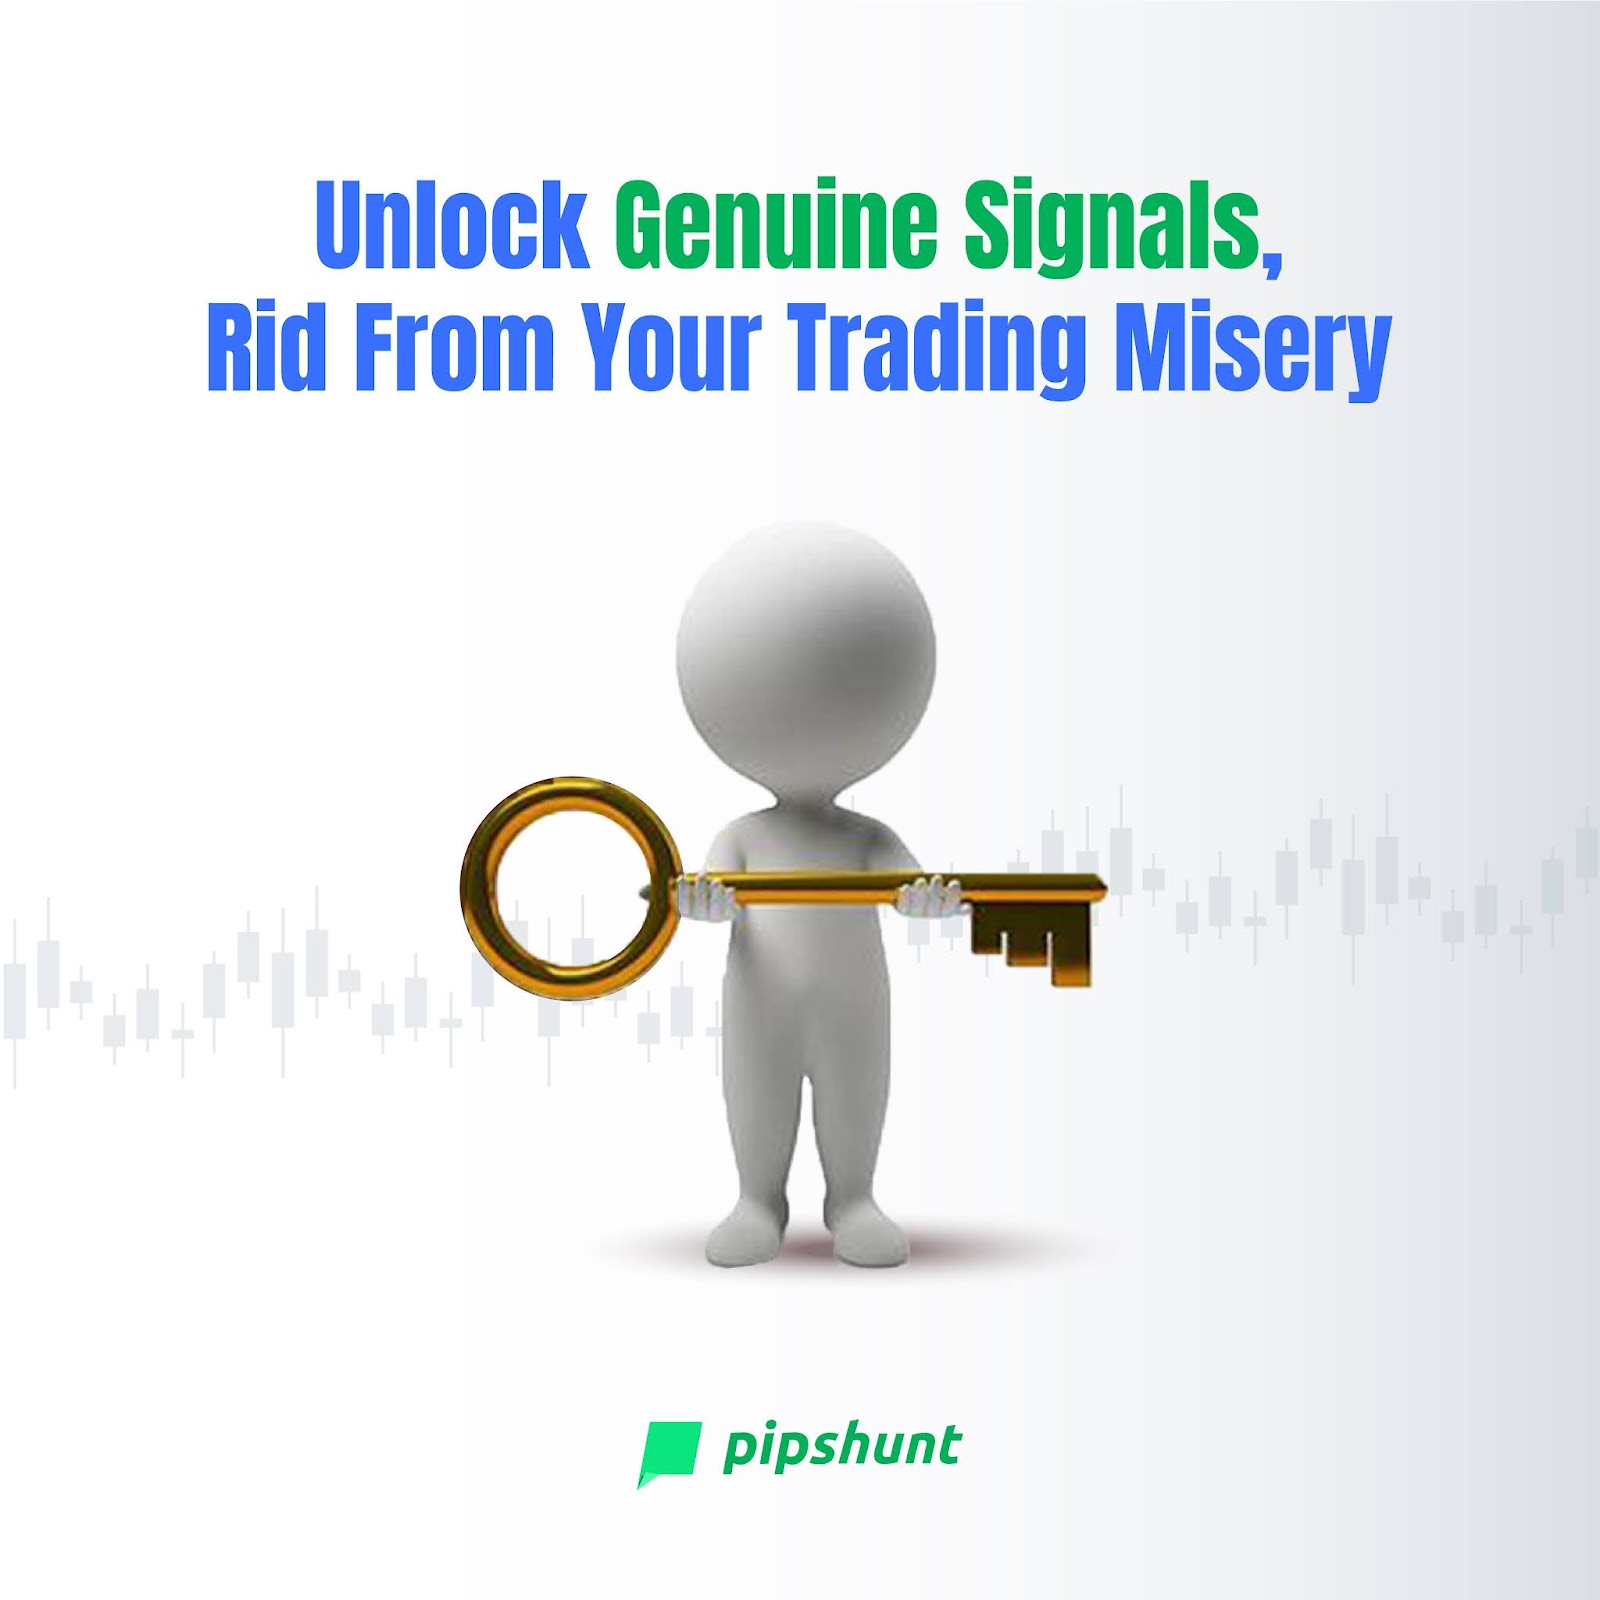 Trading Is Simple!